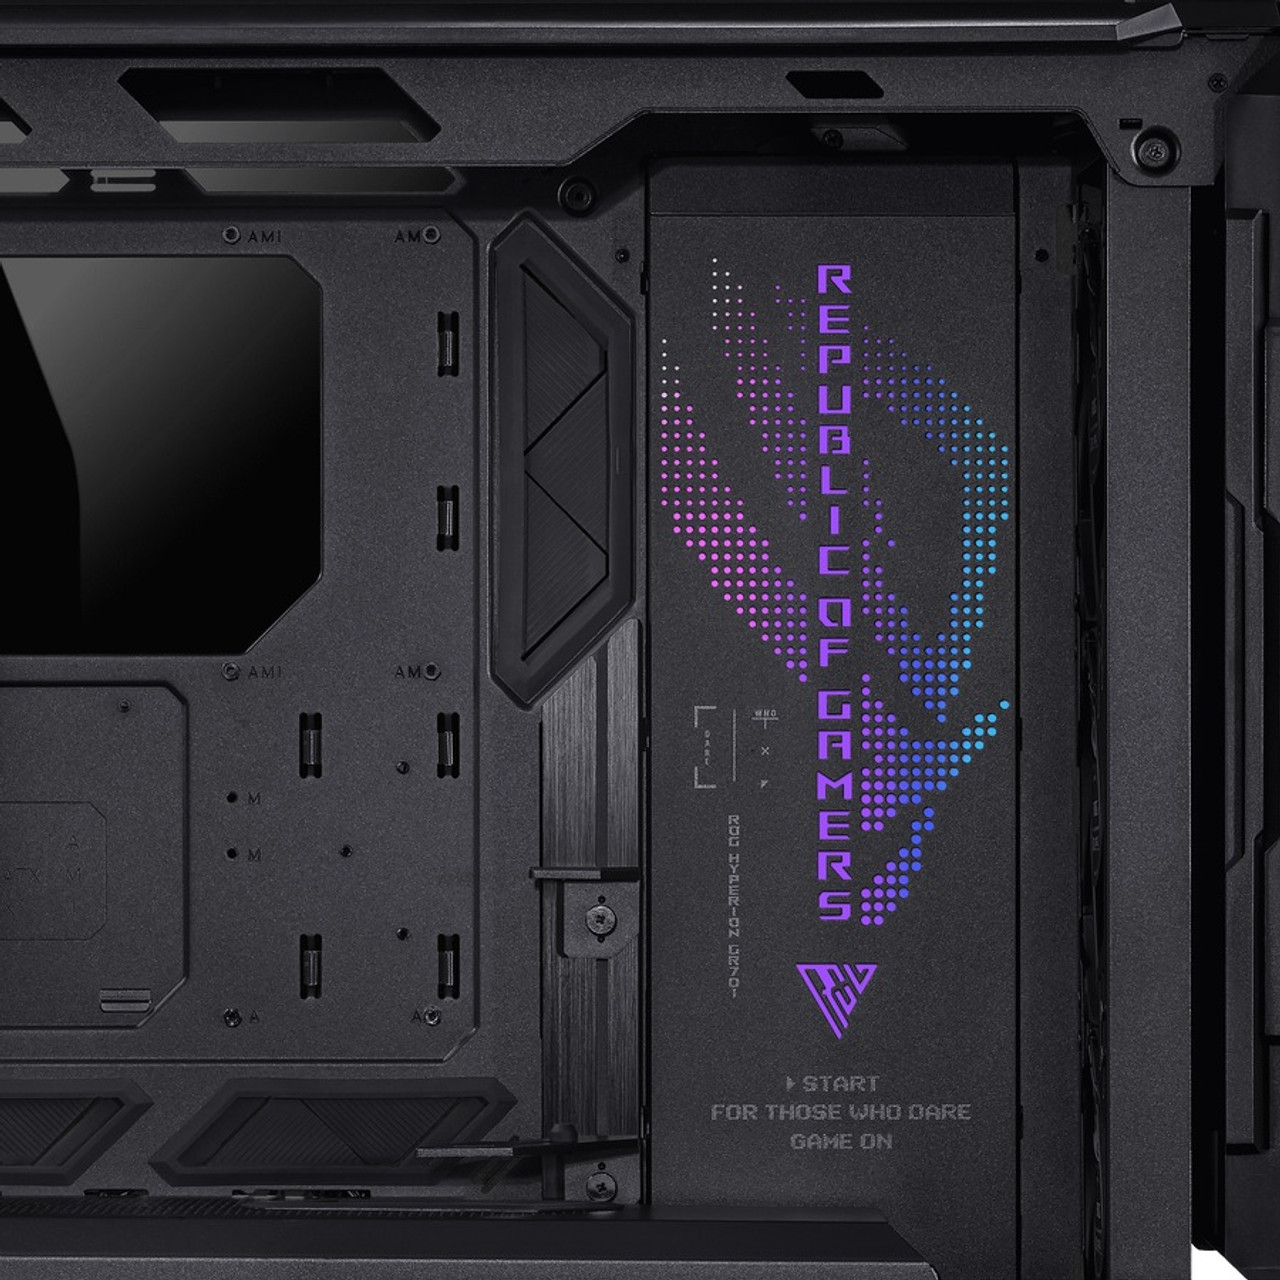 Harness the hurricane with the airflow-focused ROG Hyperion case